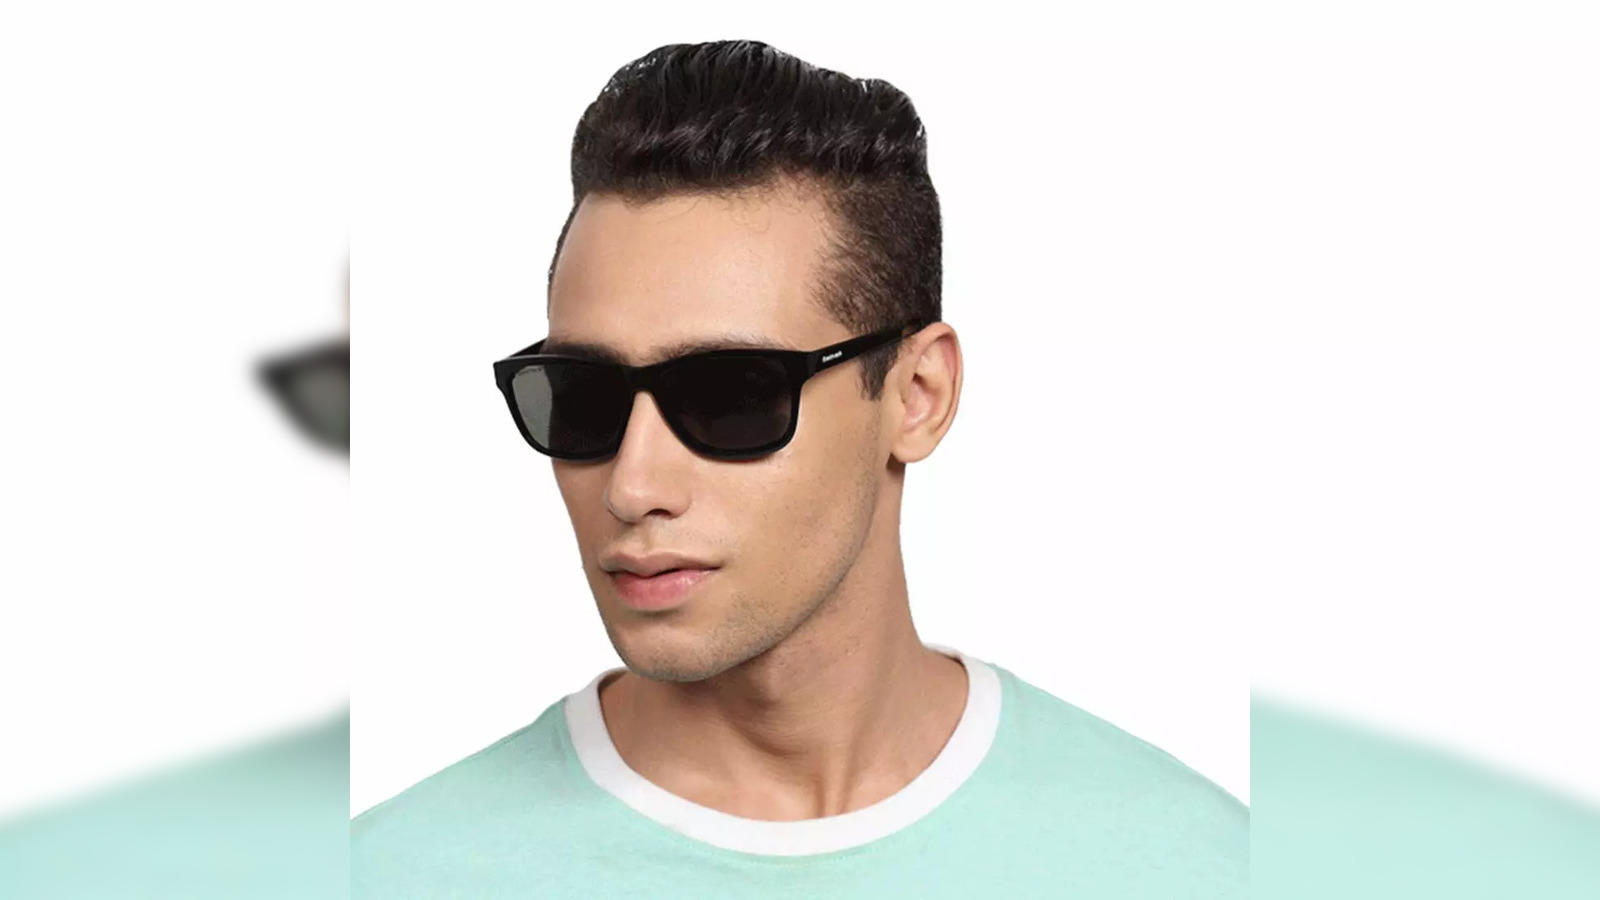 Buy Best Sunglasses for Men in India - The Economic Times